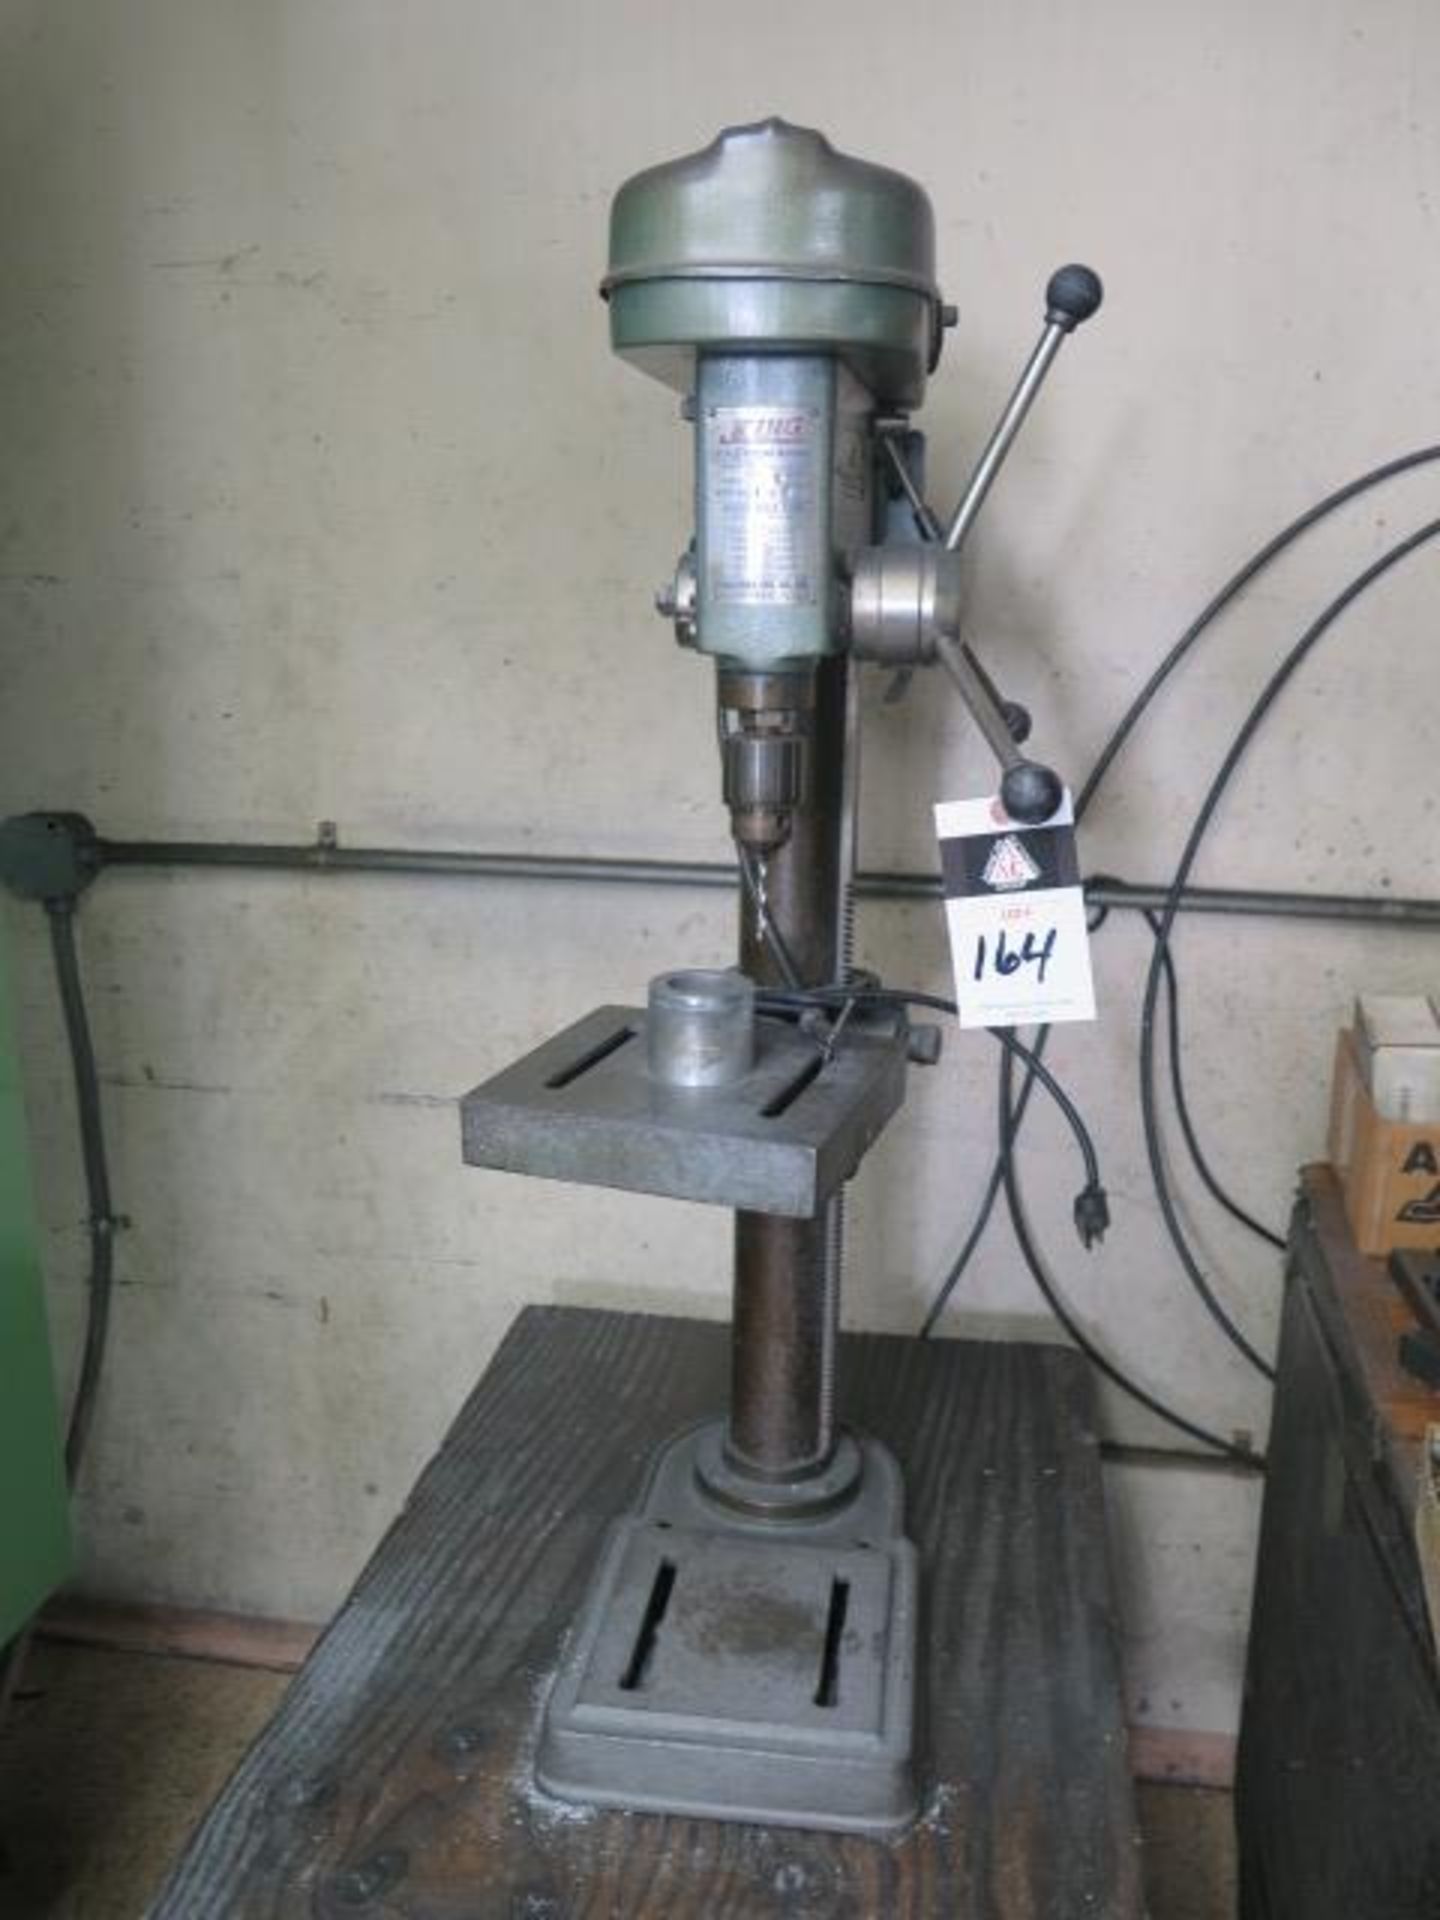 King Bench Model Drill Press w/ Bench (SOLD AS-IS - NO WARRANTY)